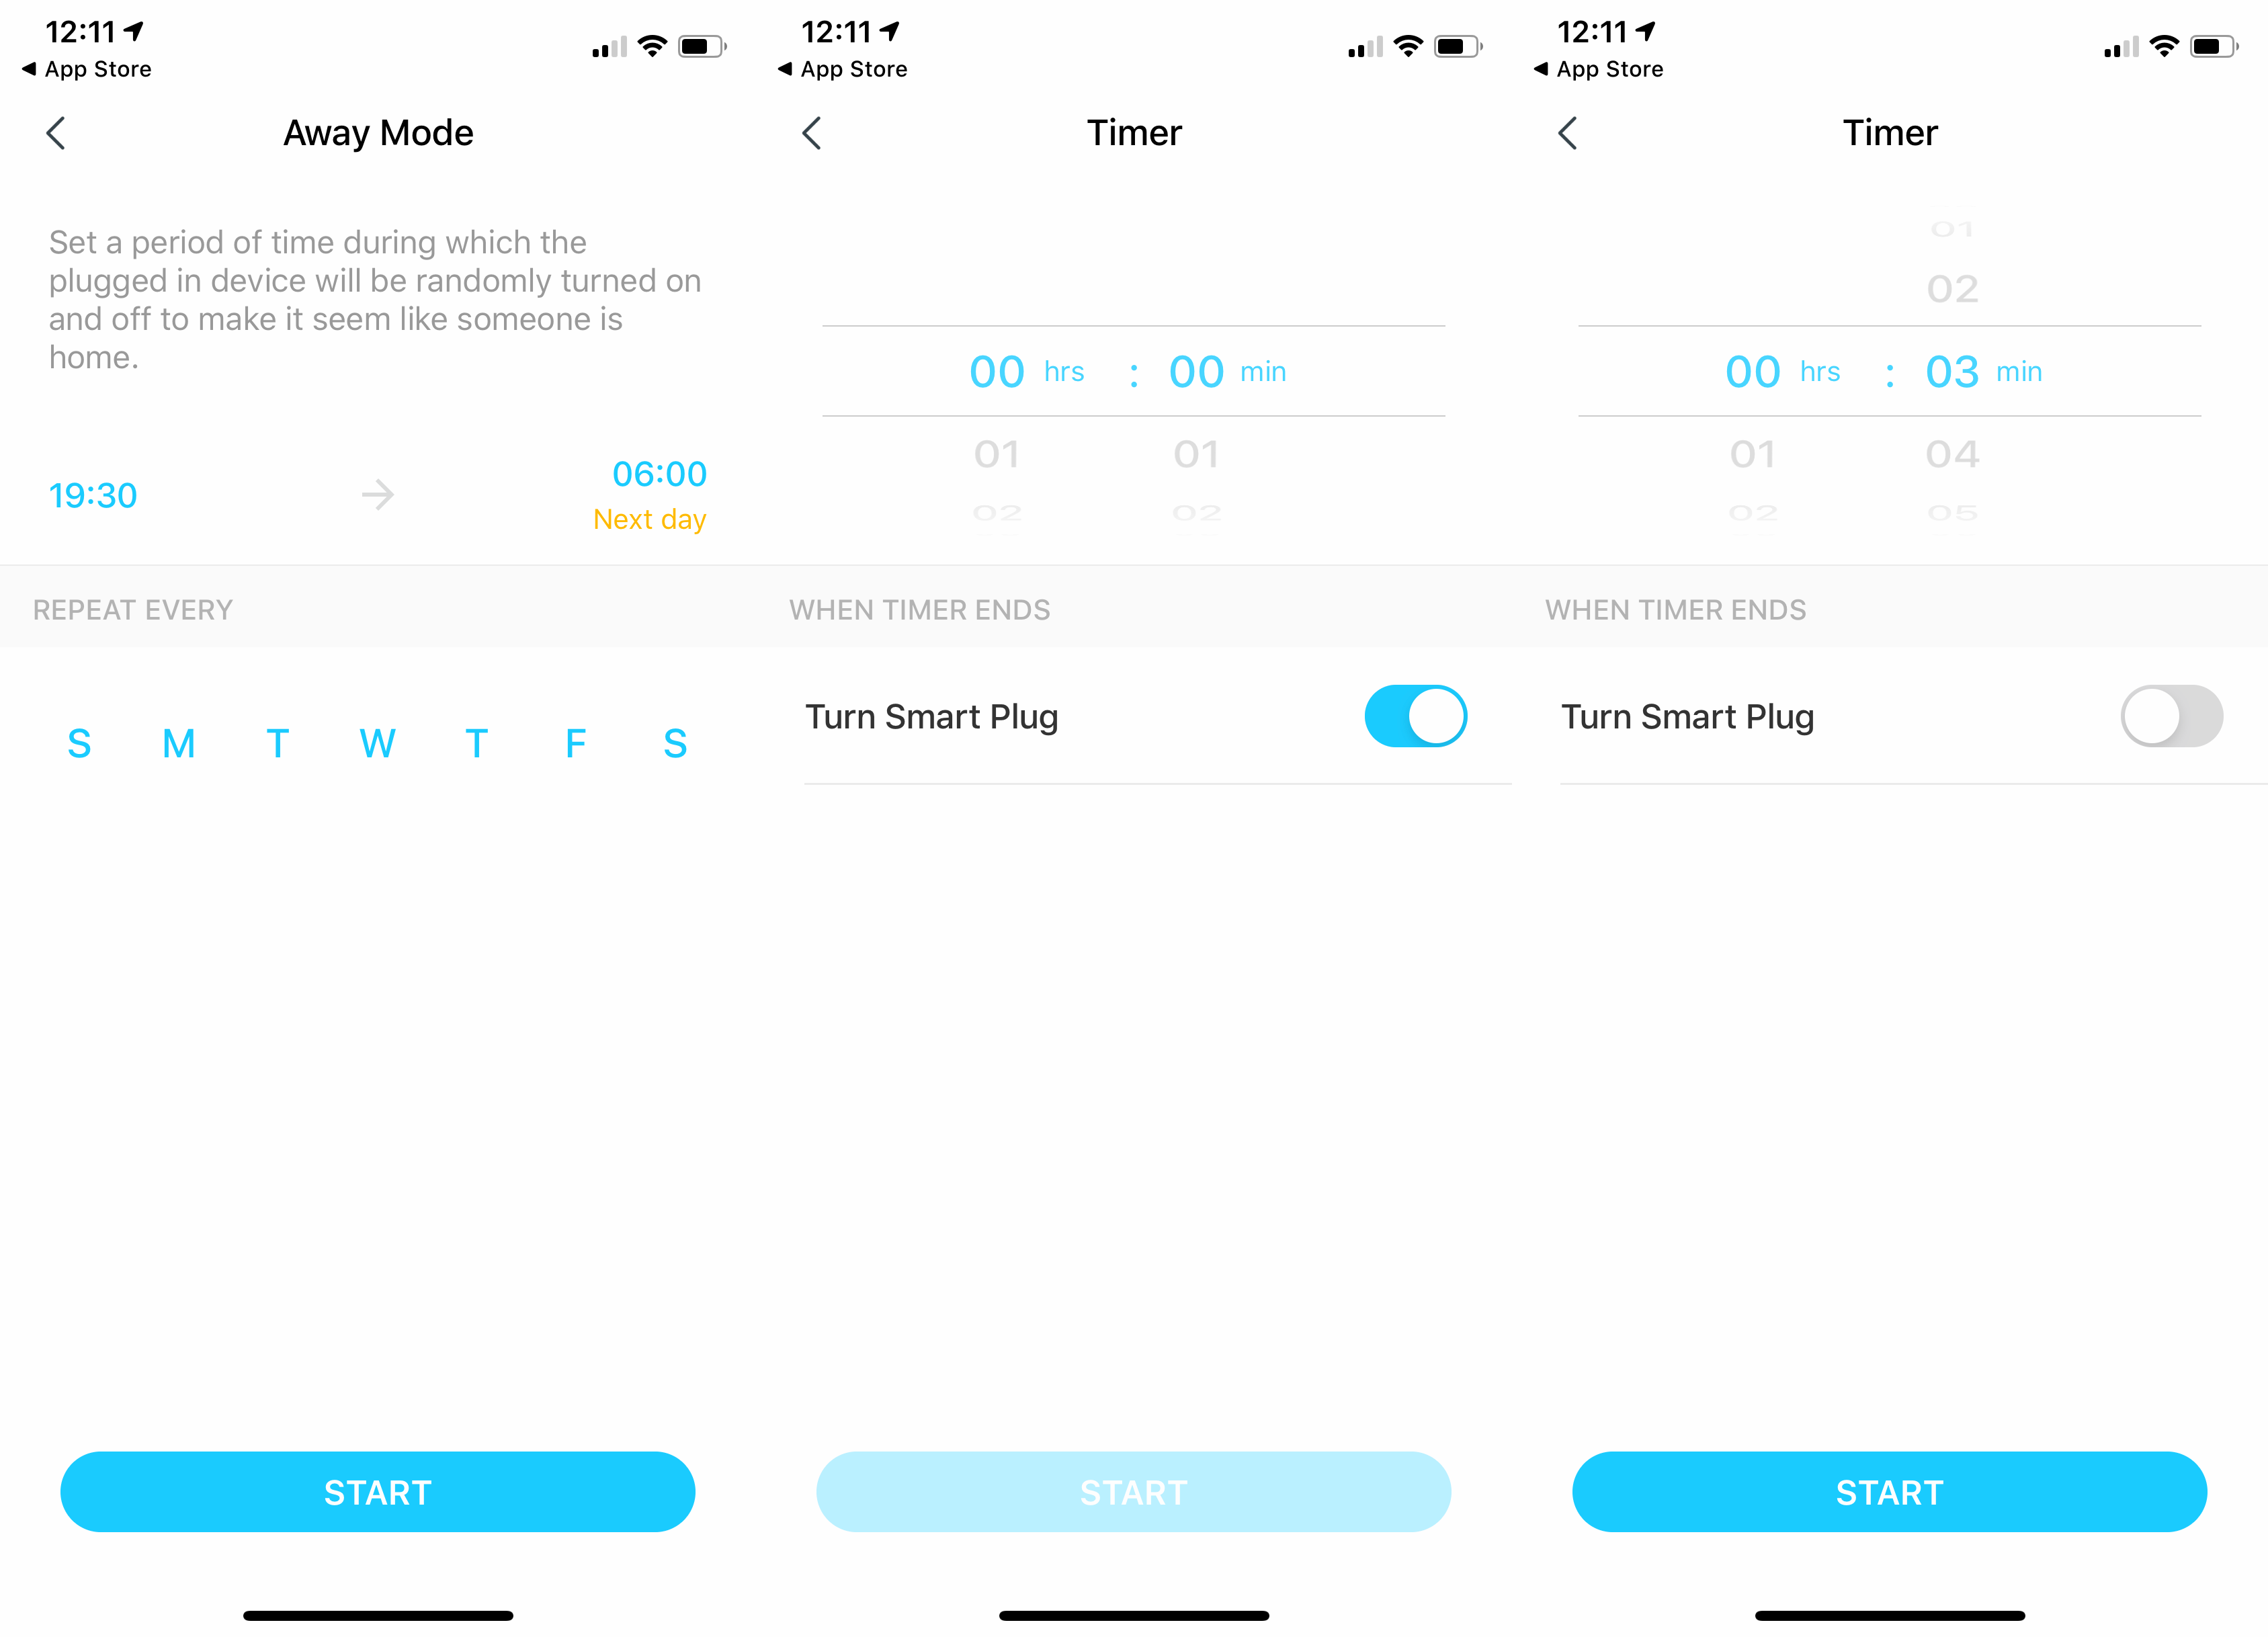 TP-Link Tapo P100 timers and away mode